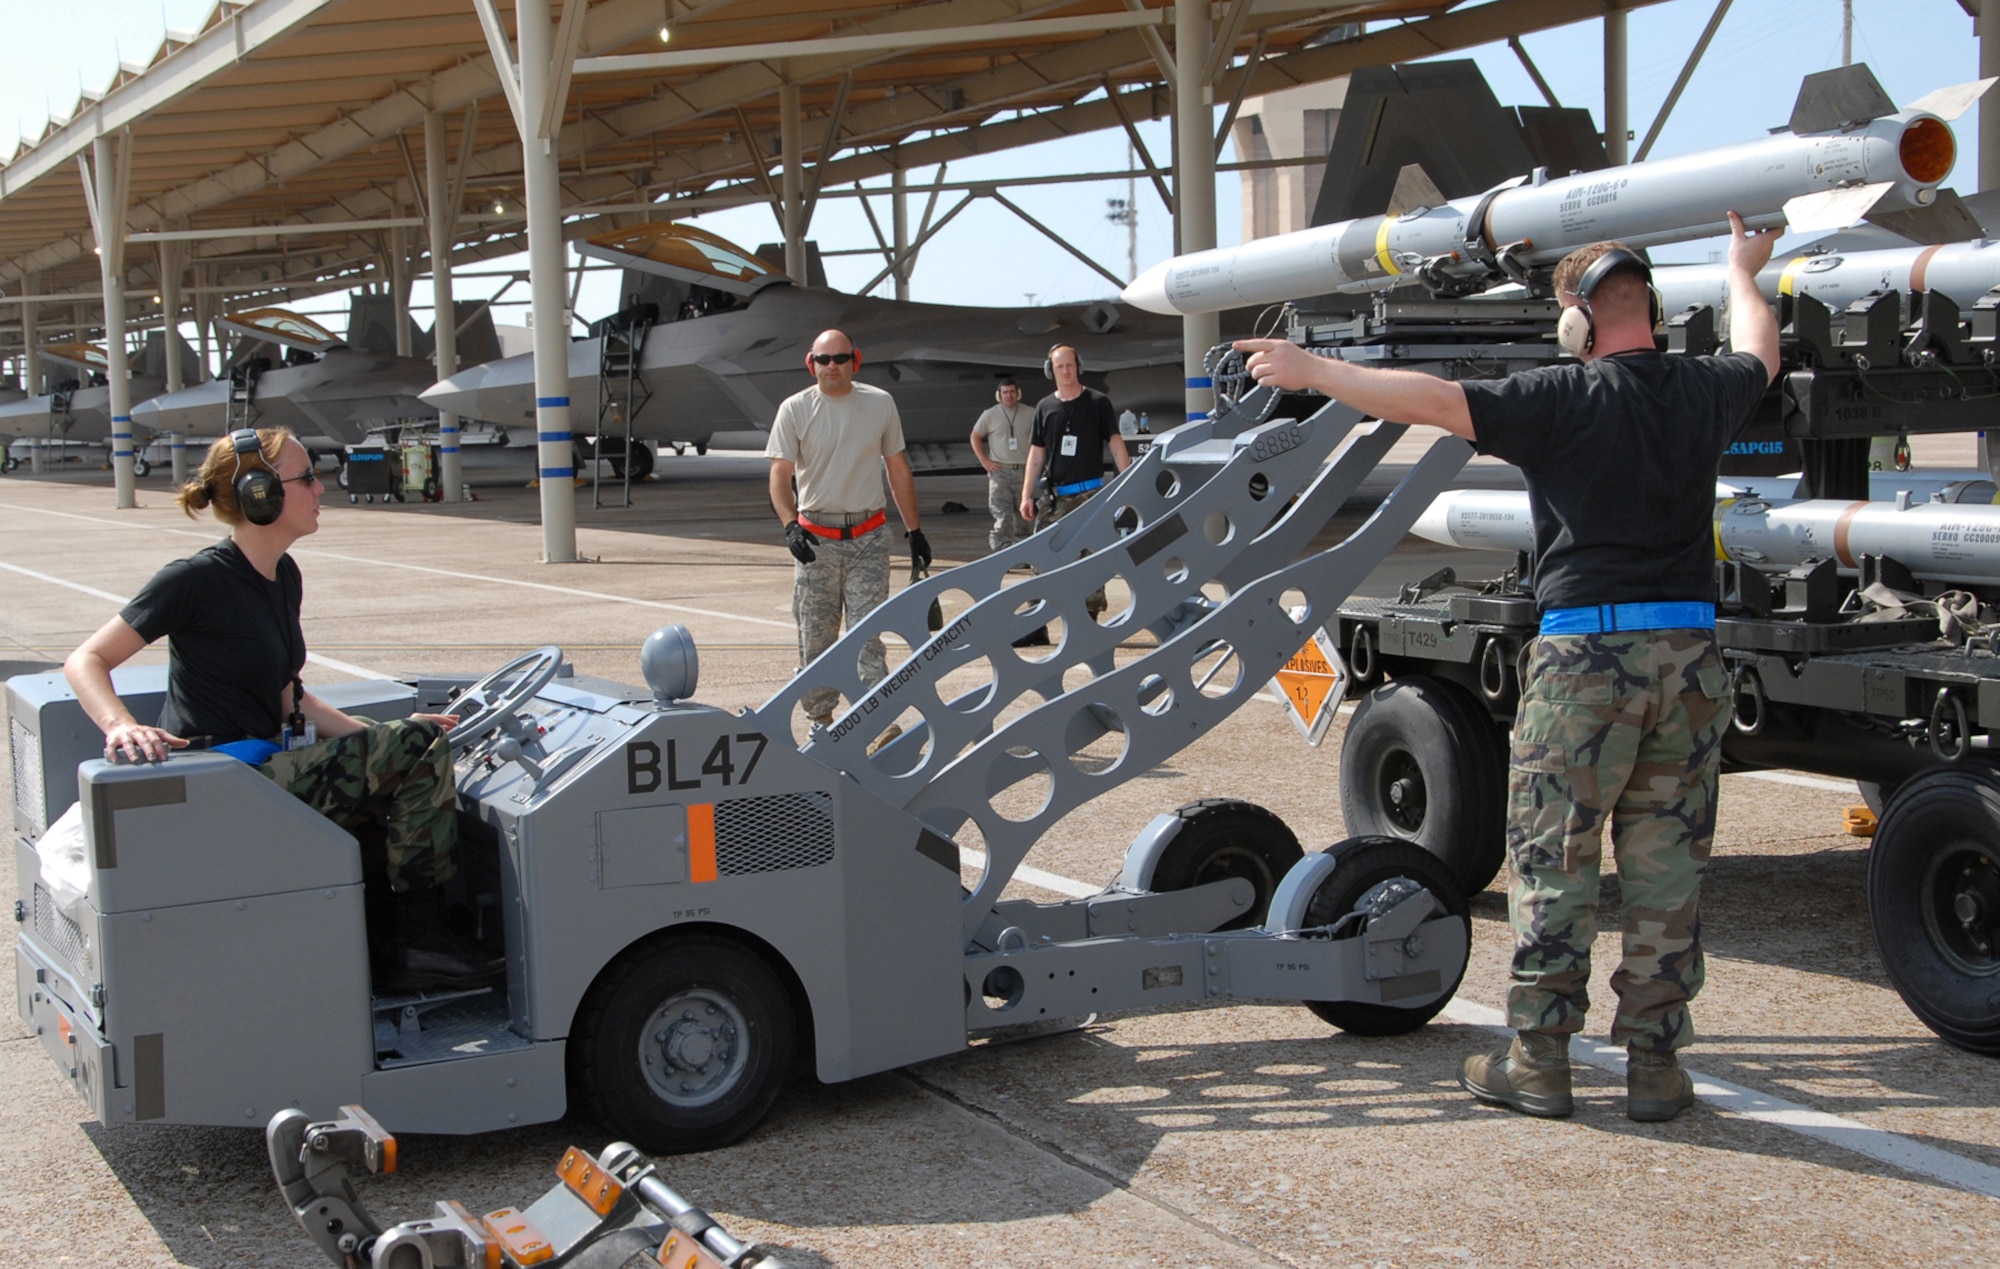 An MJ-1 bomb lift helps crew members load live munitions onto aircraft at Tyndall AFB, Fla., as part of the Weapons System Evaluation Program. The truck, similar to ones being overhauled by the 526th Electronics Maintenance Squadron, can lift up to 3,000 pounds to a height of 78 inches, using side fork adapters and extension lift arms for increased flexibility.